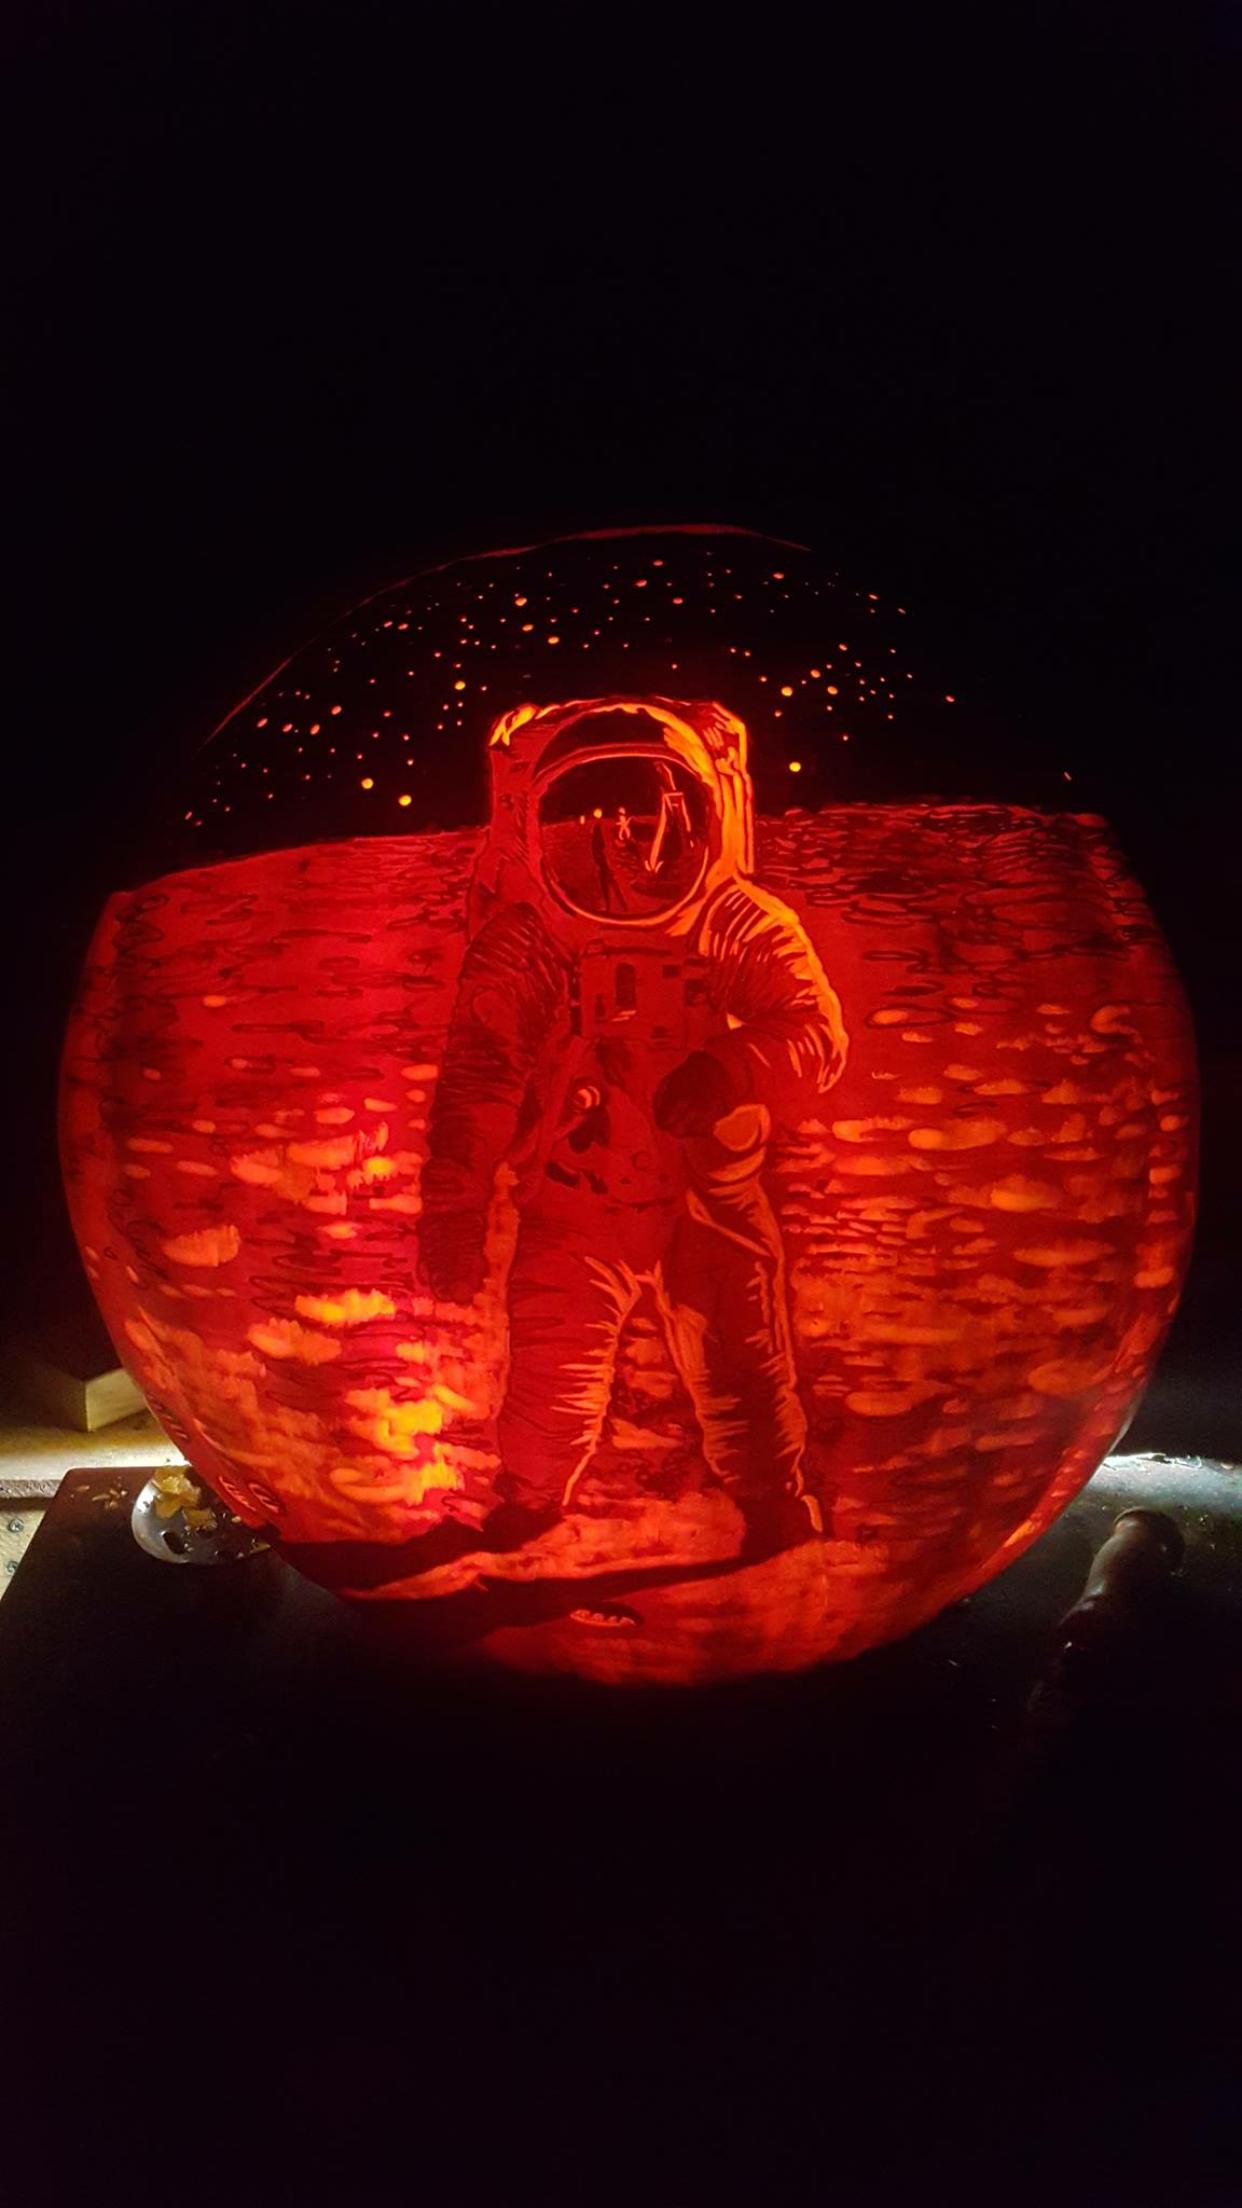 This carved pumpkin.